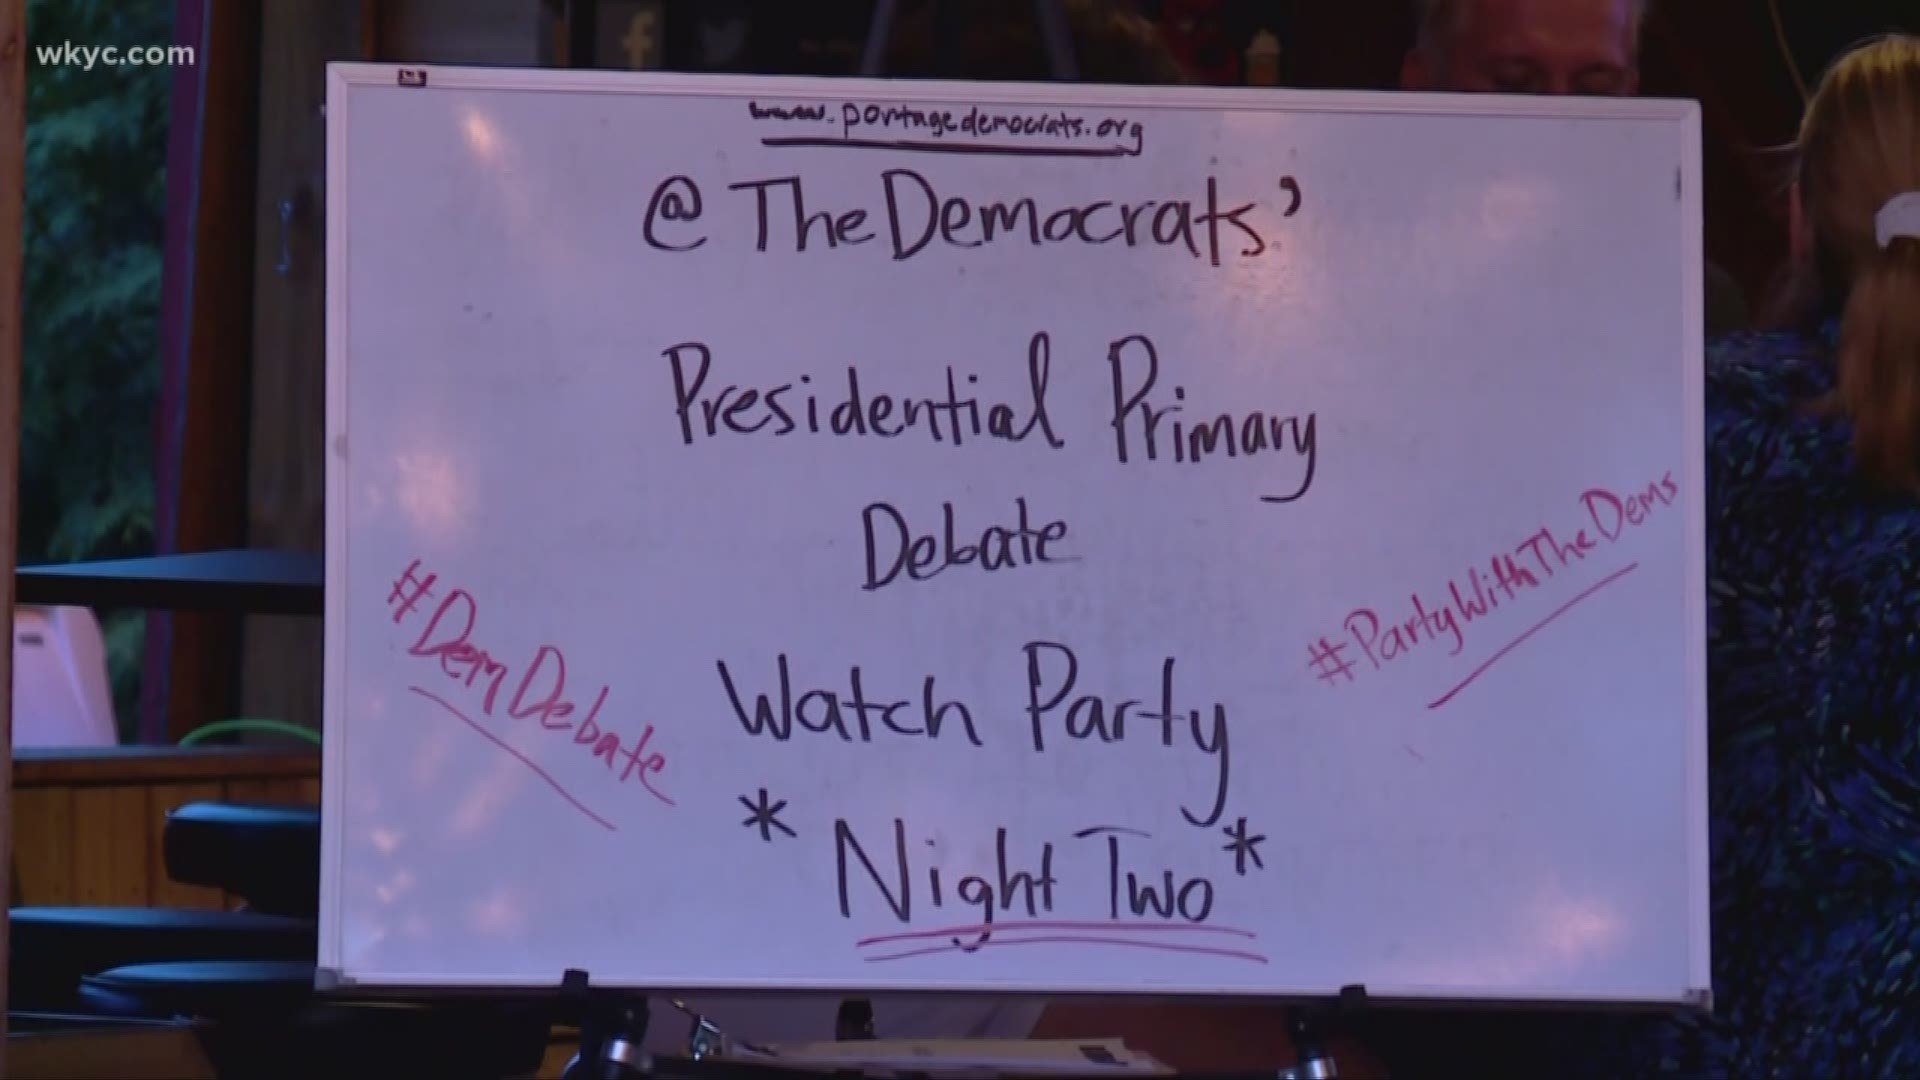 Our Ray Strickland attended a watch party of the Democratic presidential primary debate in Ravenna.